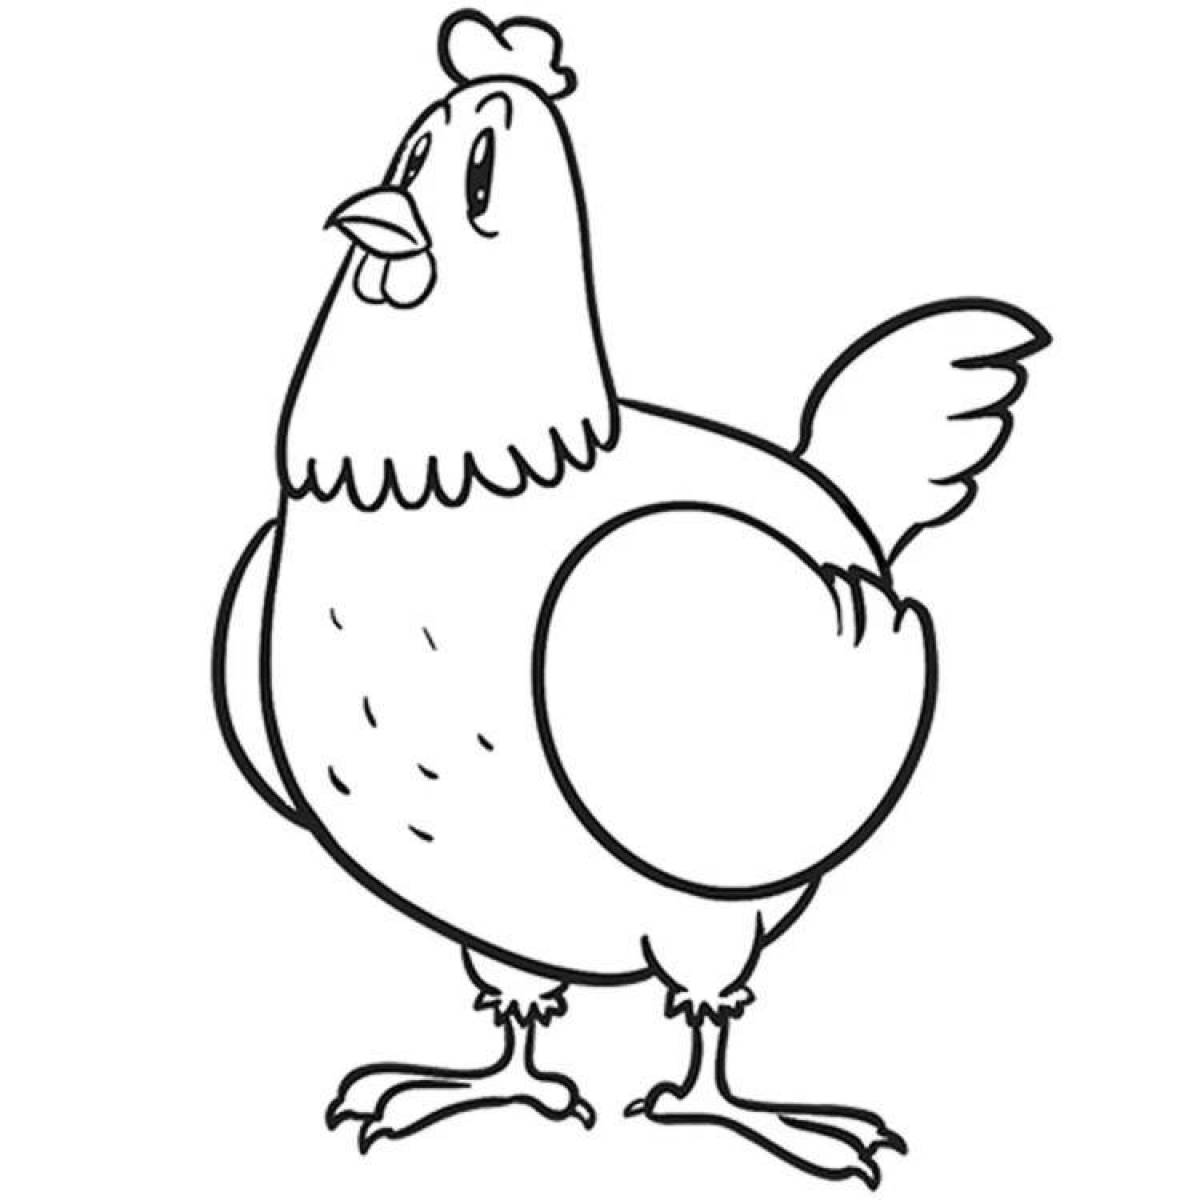 Coloring page brave chickens